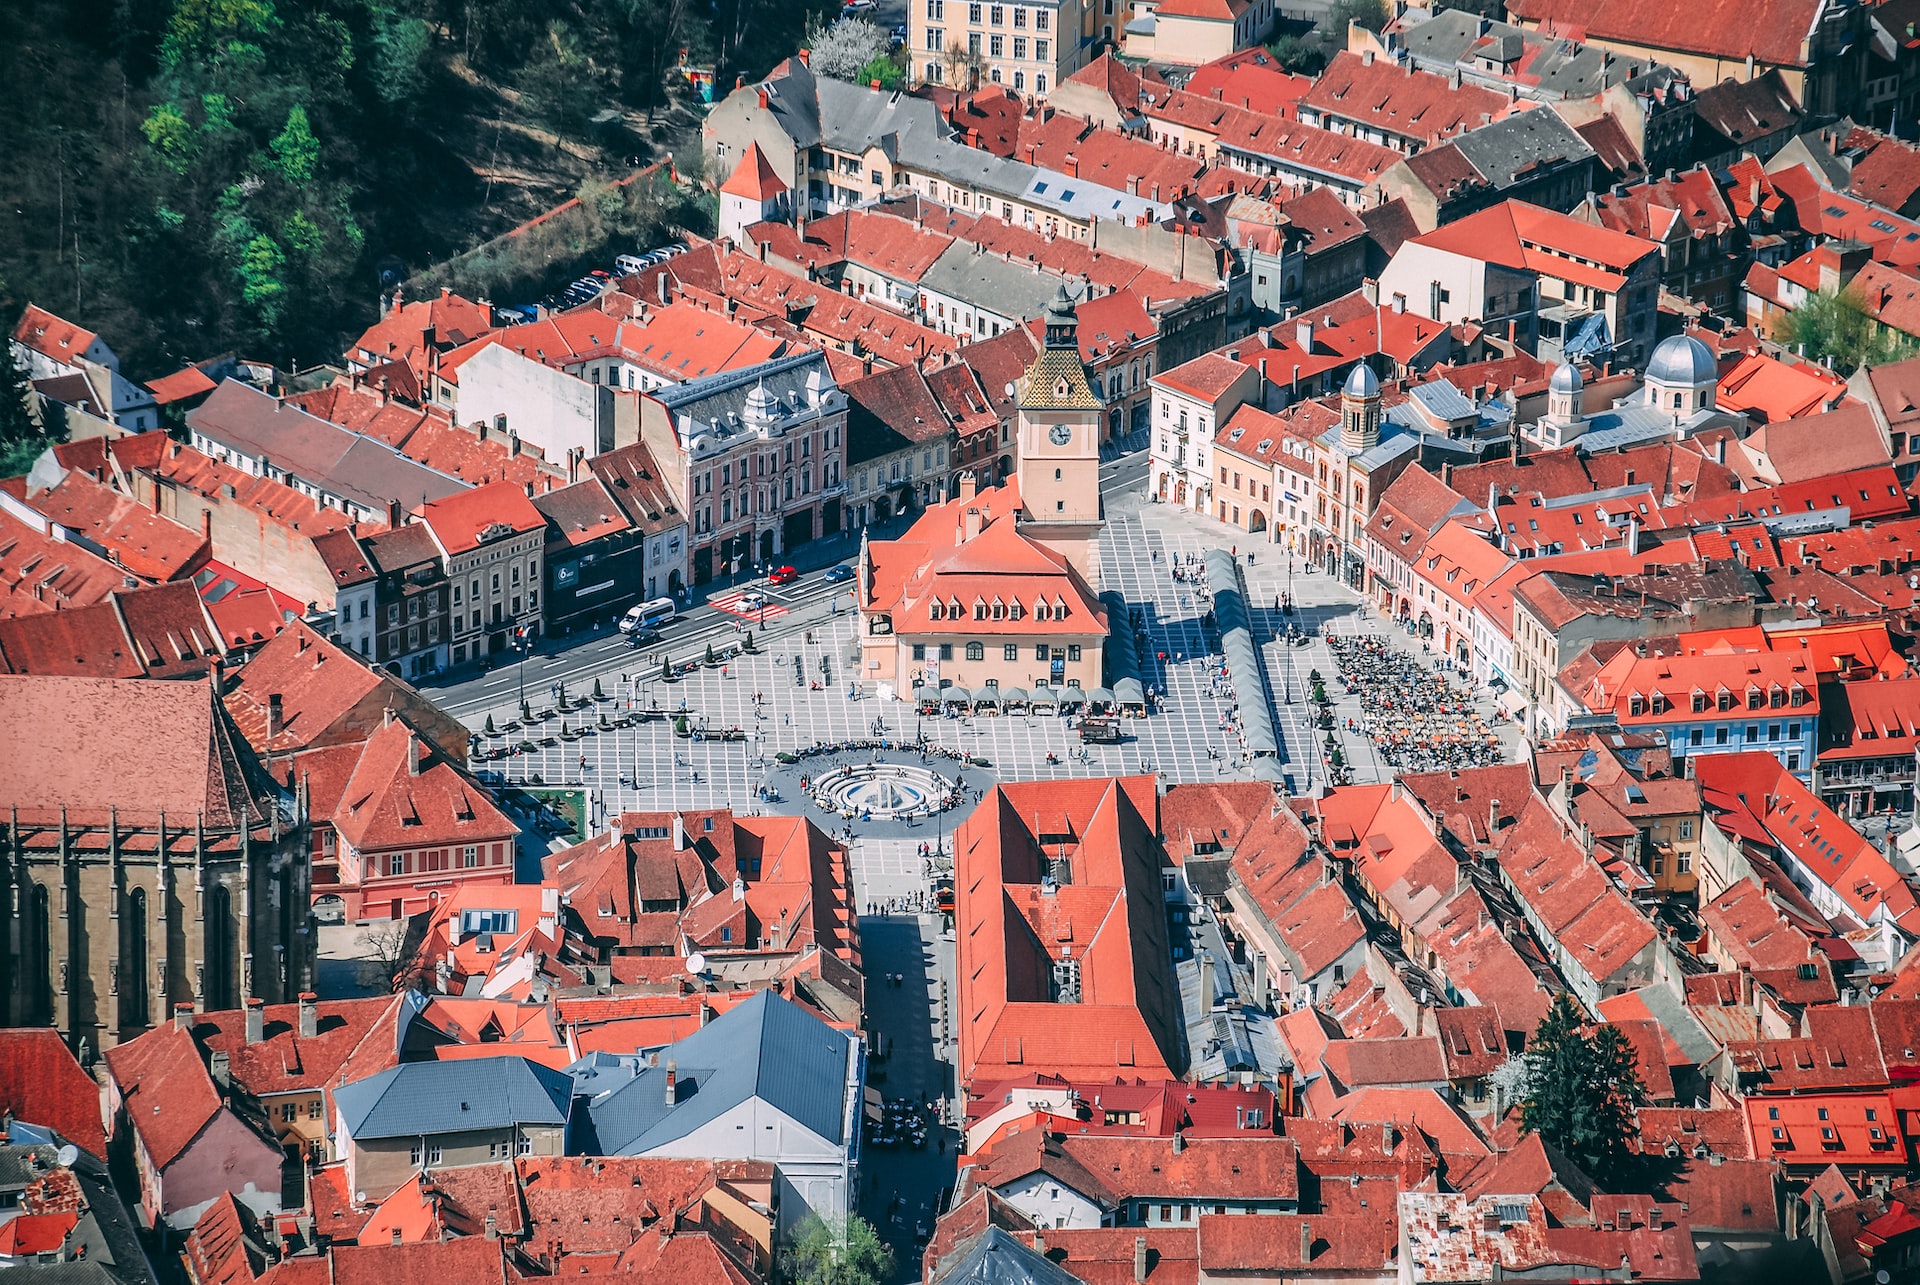 Aerial view of Main Square